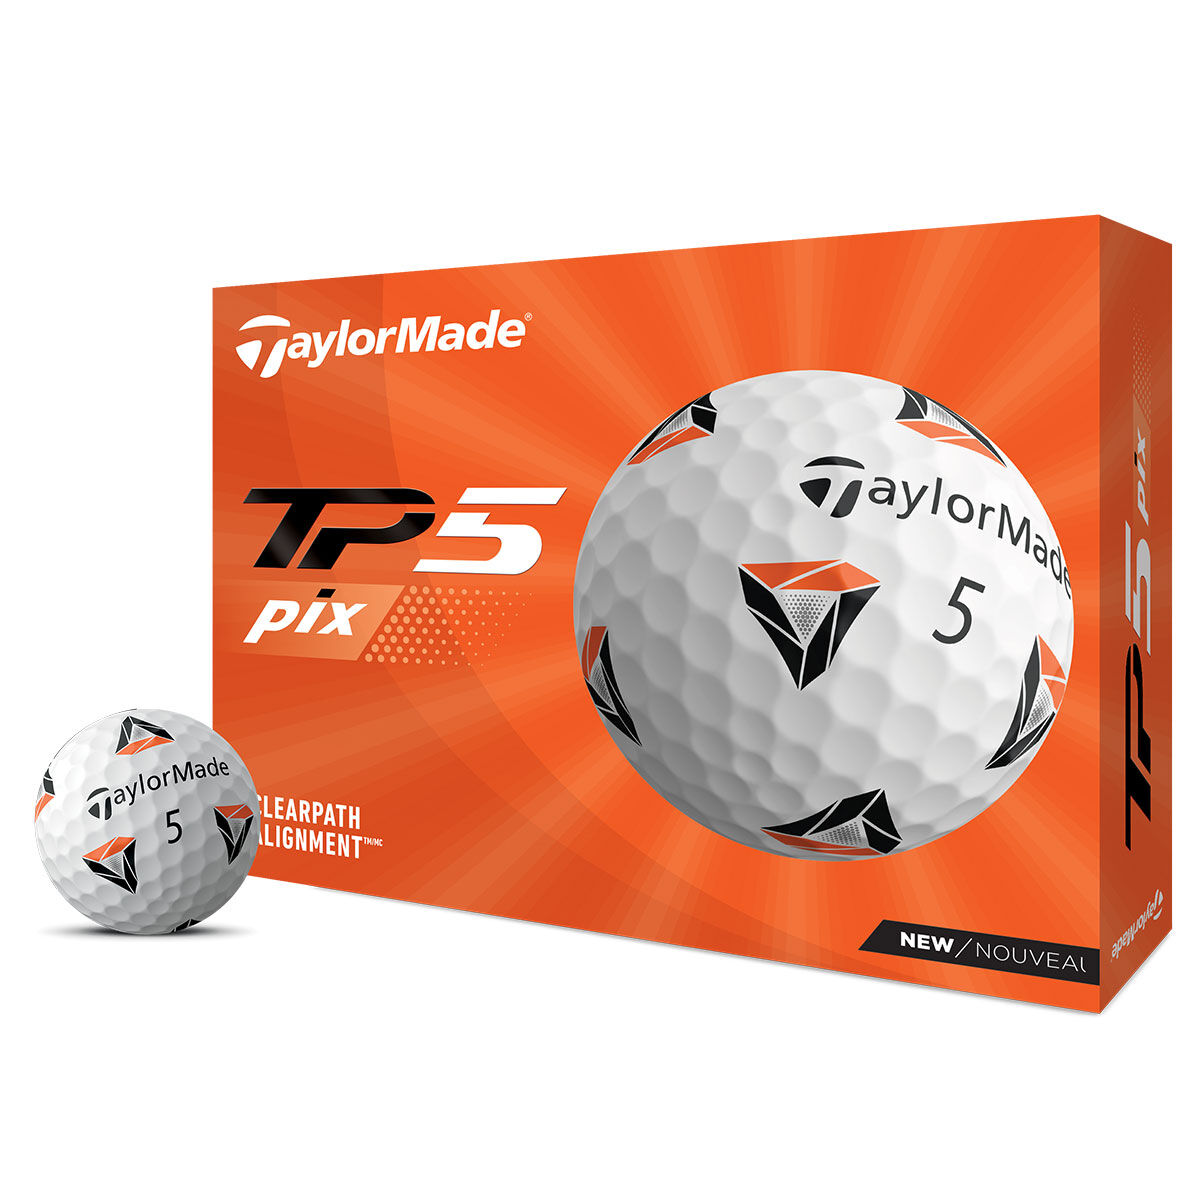 TaylorMade TP5 pix 2.0 12 Golf Ball Pack, Male, White, One Size | American Golf